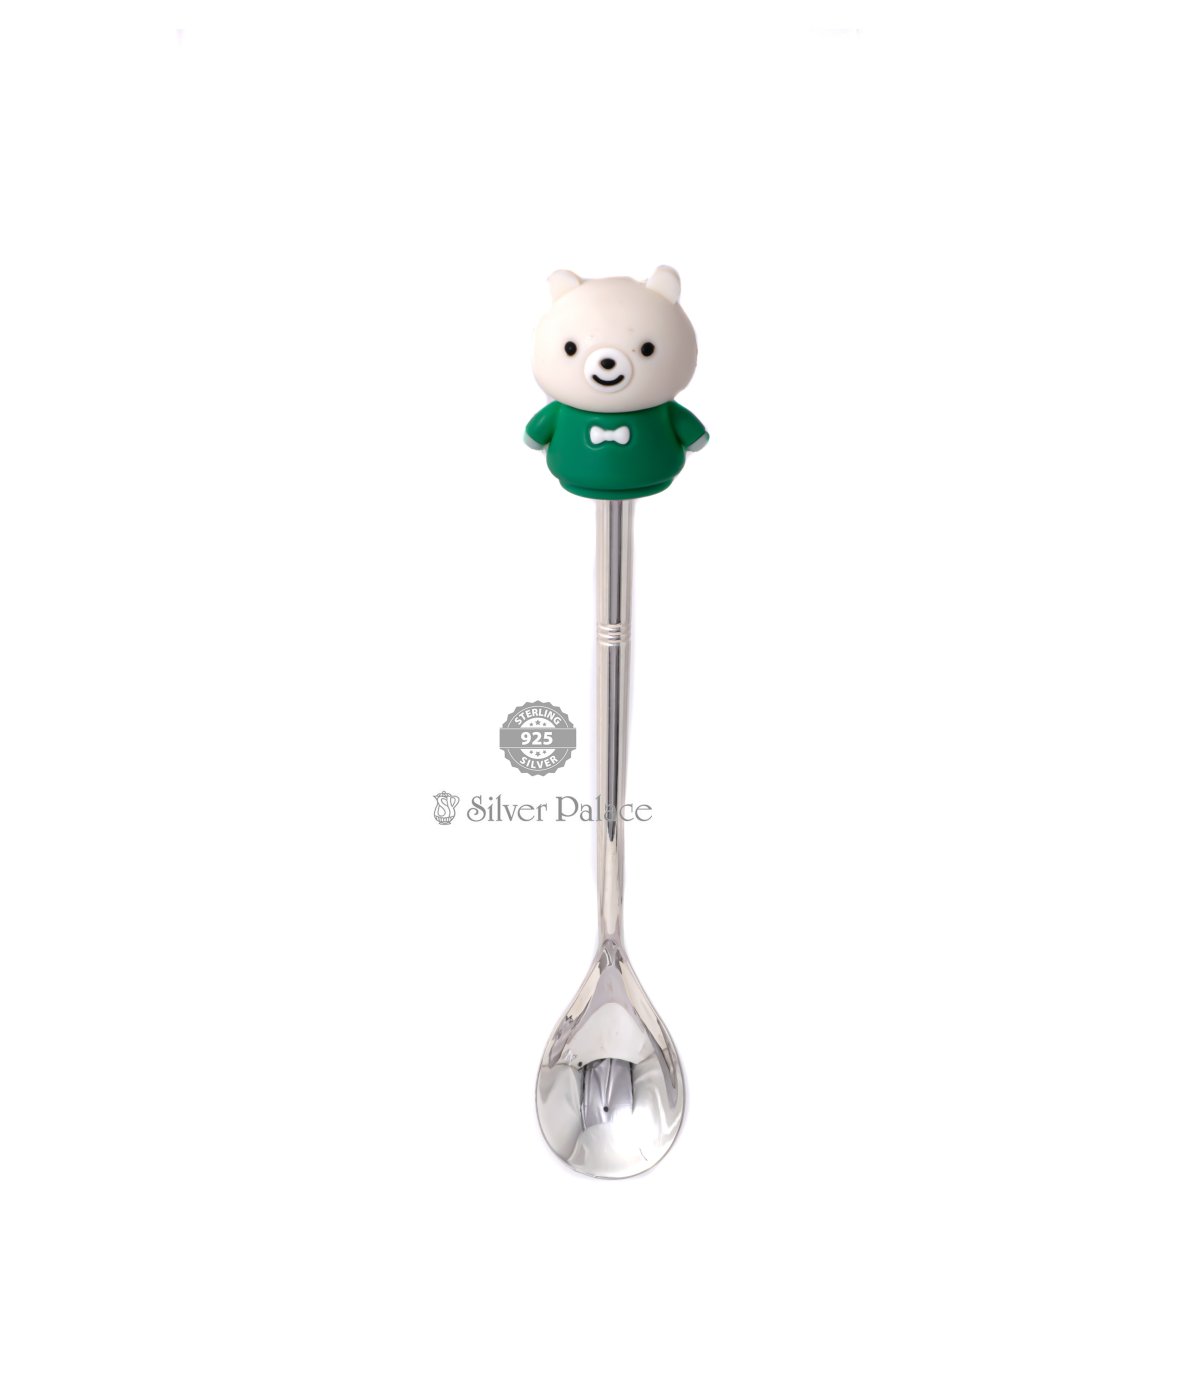  925 SILVER SPOON FOR BABY WITH SILICON TEDDY BEAR CARTOON